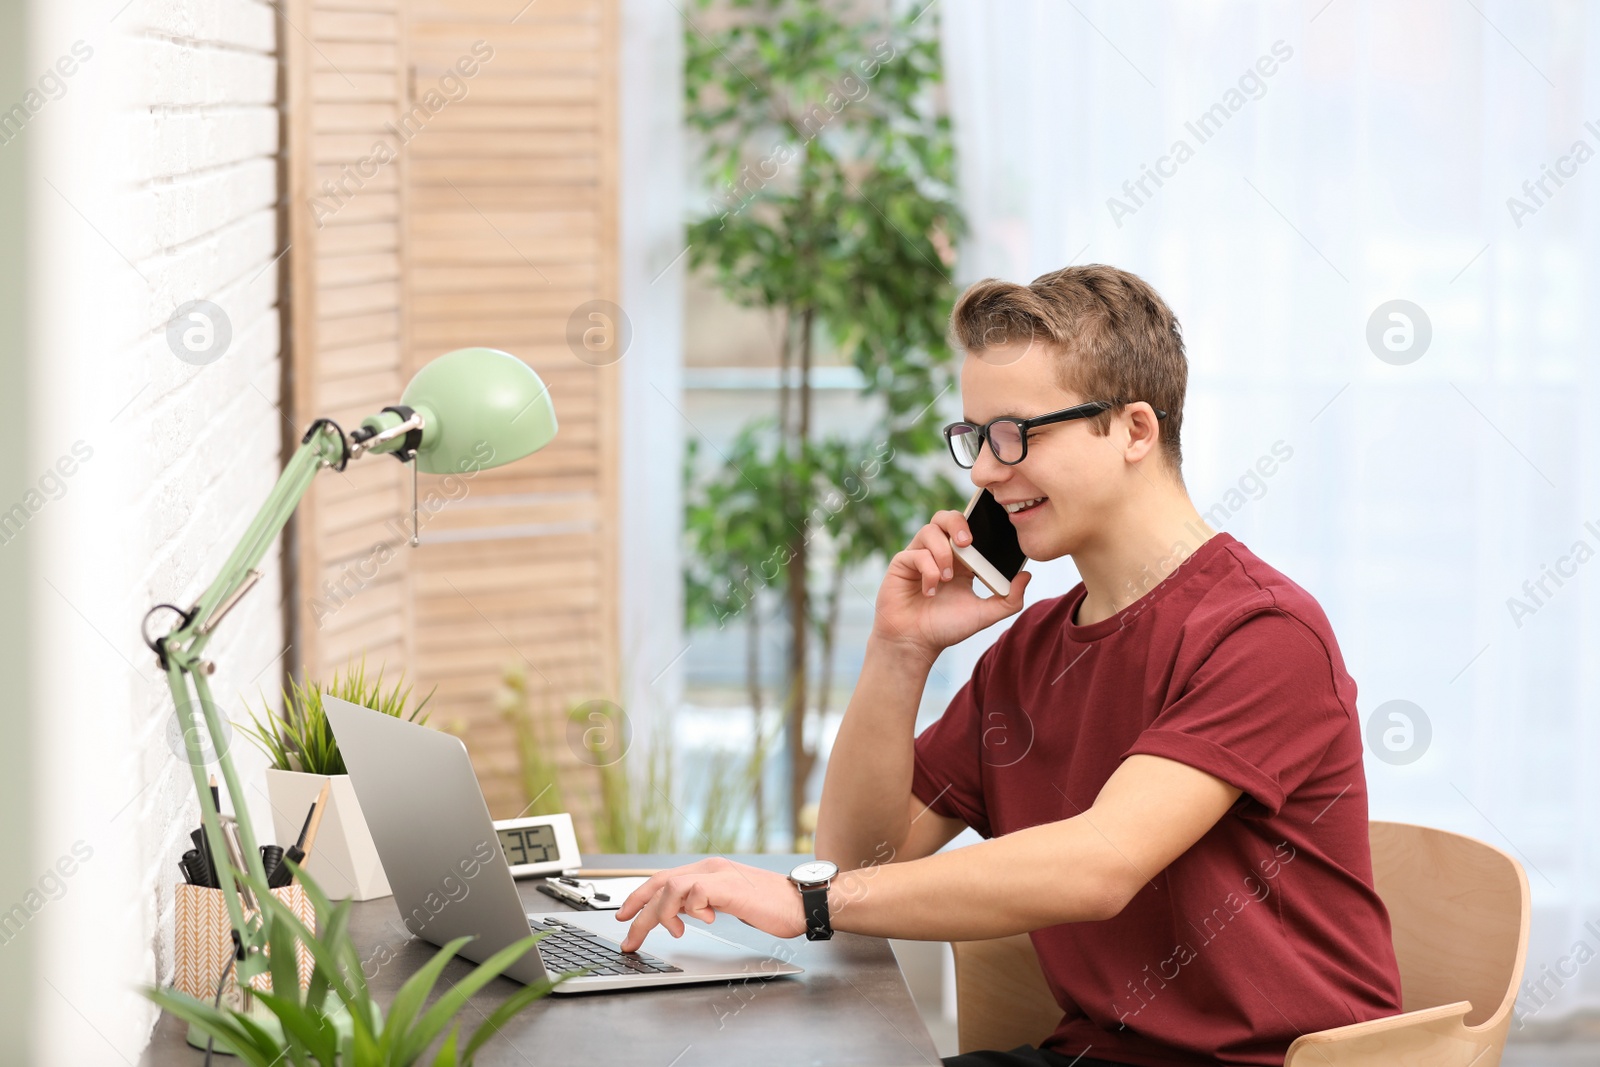 Photo of Handsome teenage boy talking on phone and using laptop at table in room